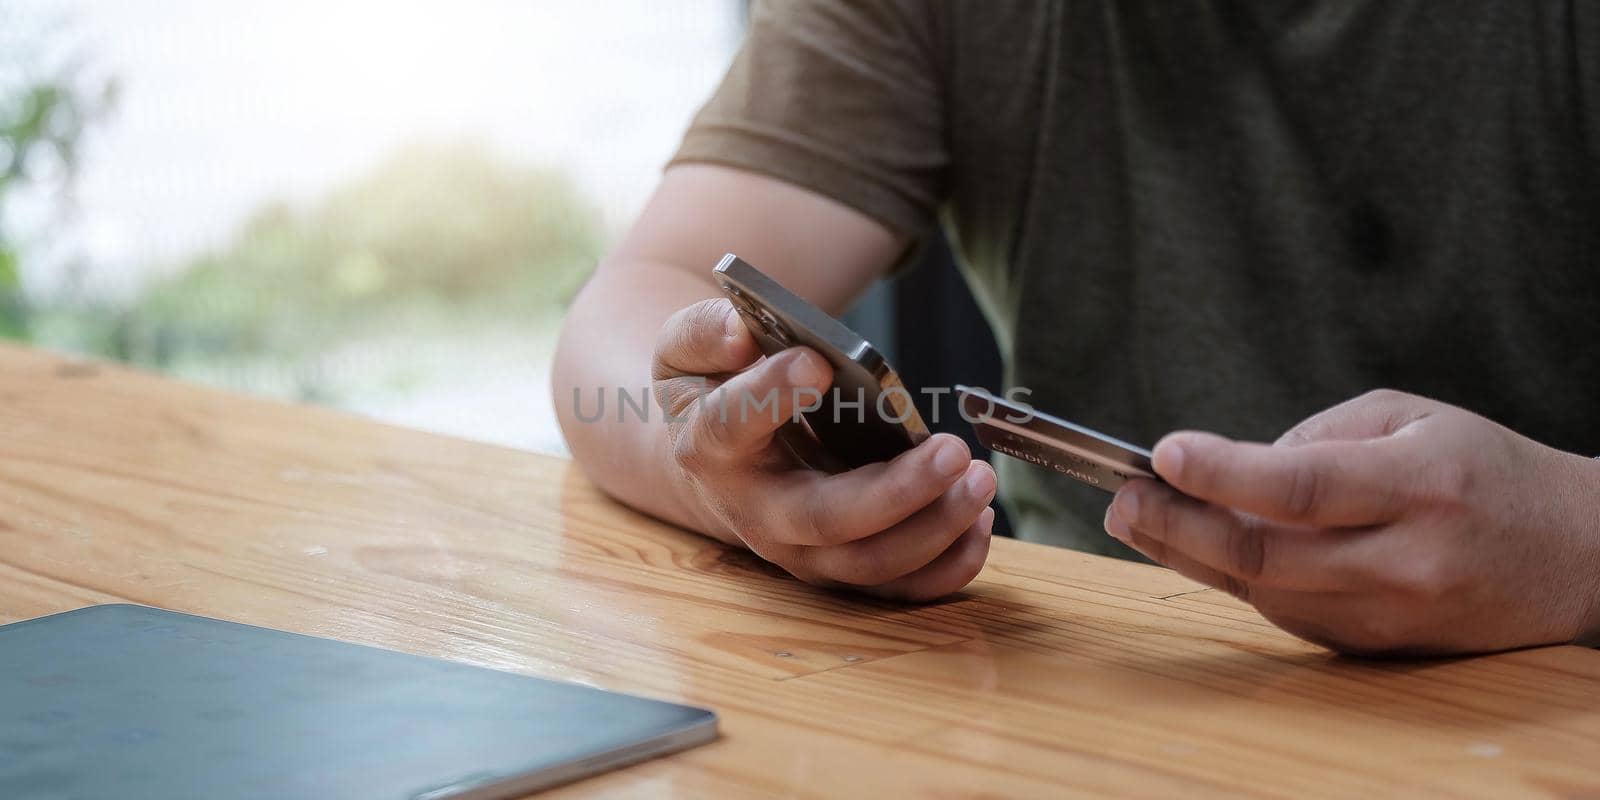 Man holding credit card and using smartphone at home, businessman shopping online, e-commerce, internet banking, spending money, working from home concept.